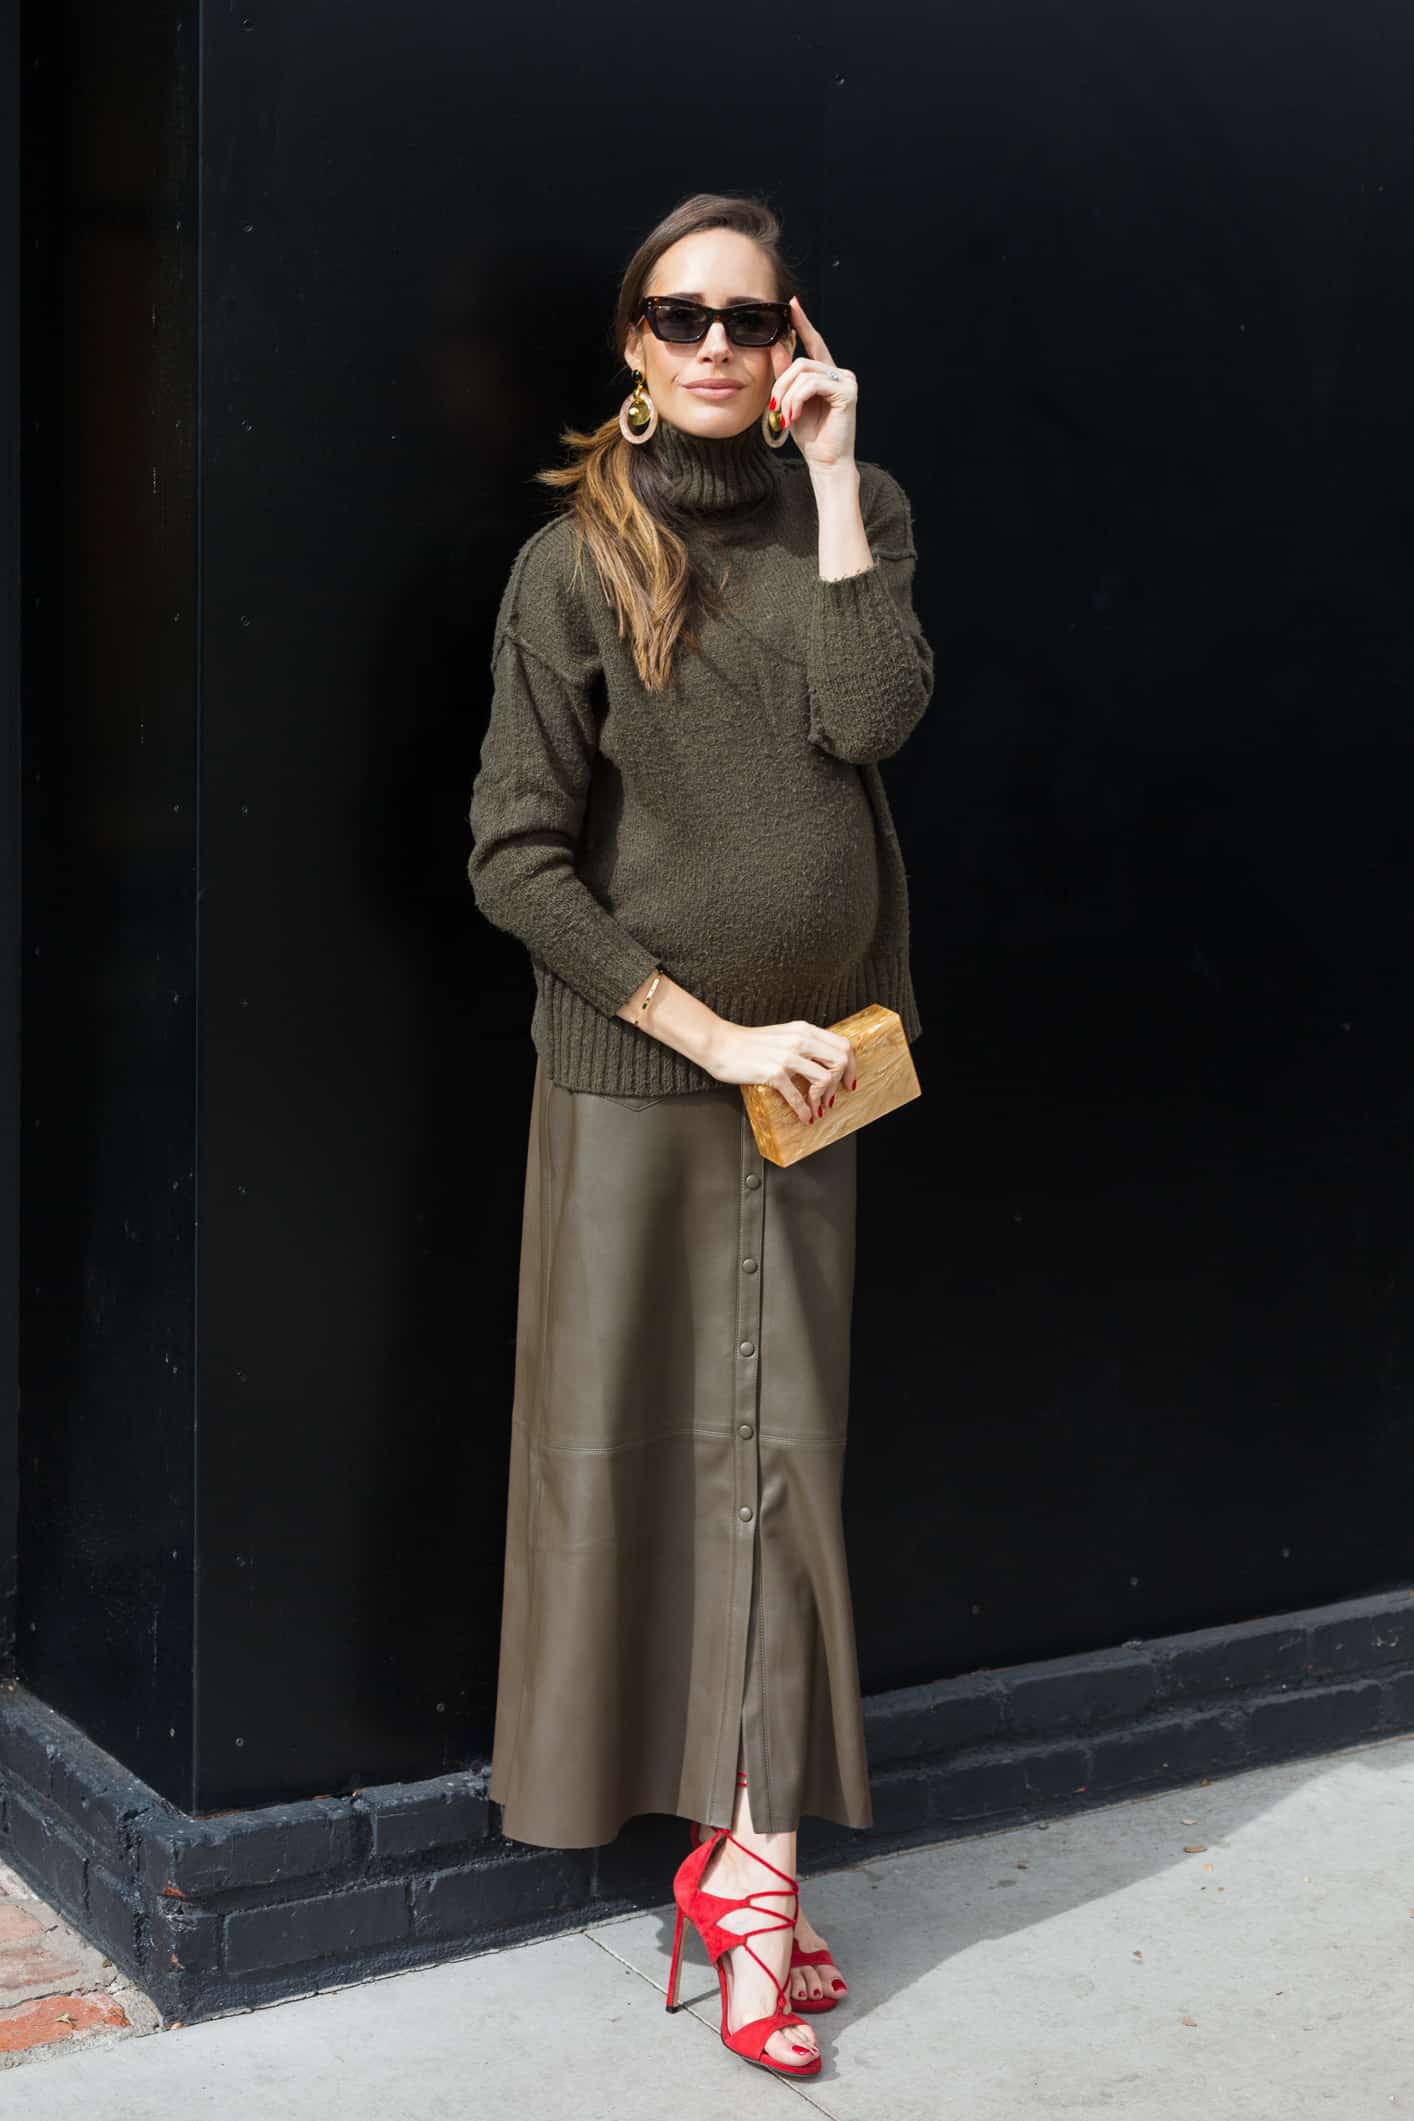 Louise Roe wearing a monochrome olive outfit with turtleneck leather skirt and red heels